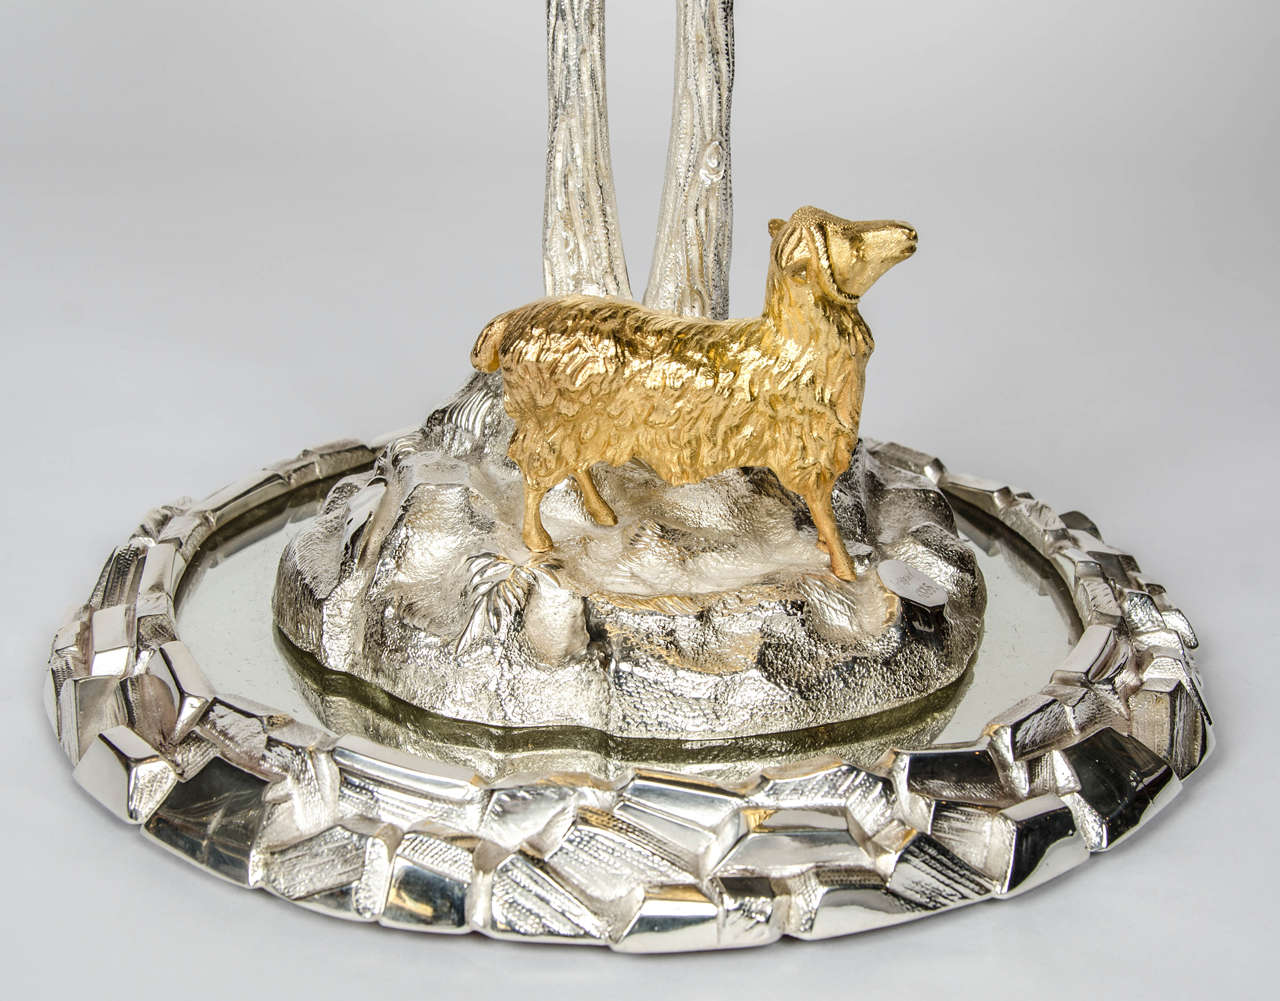 Rococo Revival 19th century silver and gold plated centrepiece by T. Bradbury & Sons For Sale